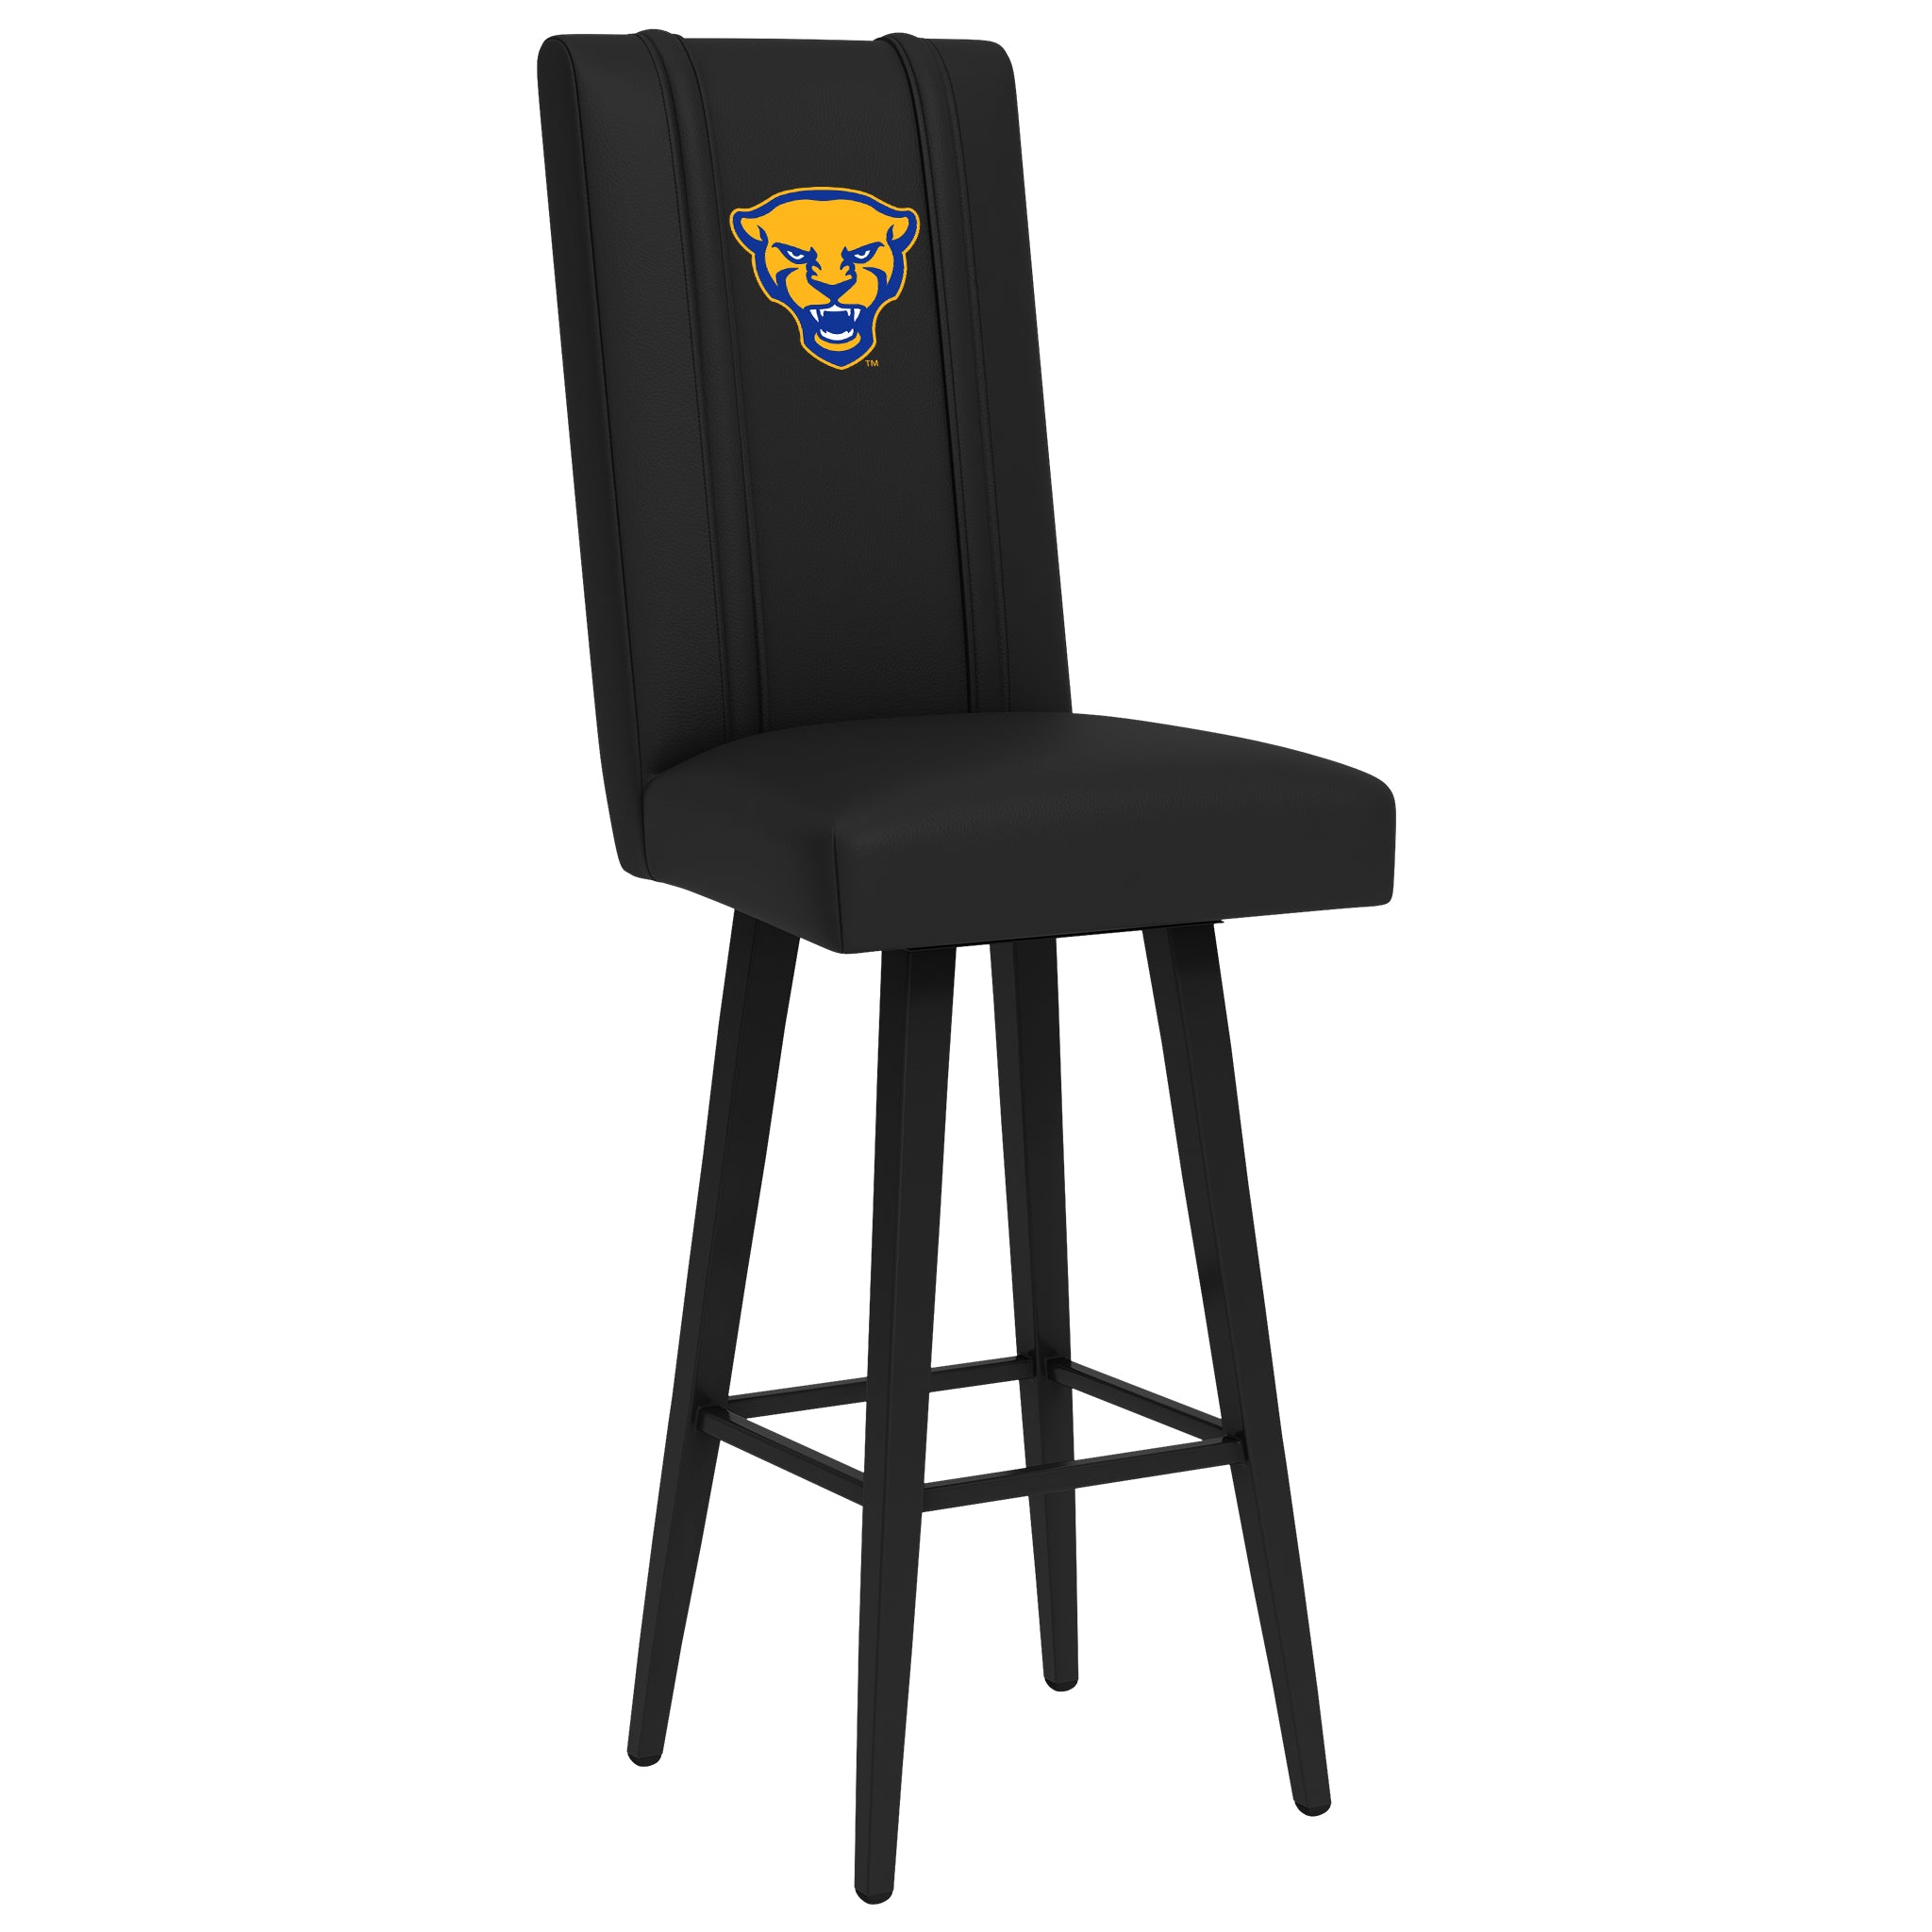 Pittsburgh Panthers Swivel Bar Stool 2000 With Pittsburgh Panthers Alternate Logo